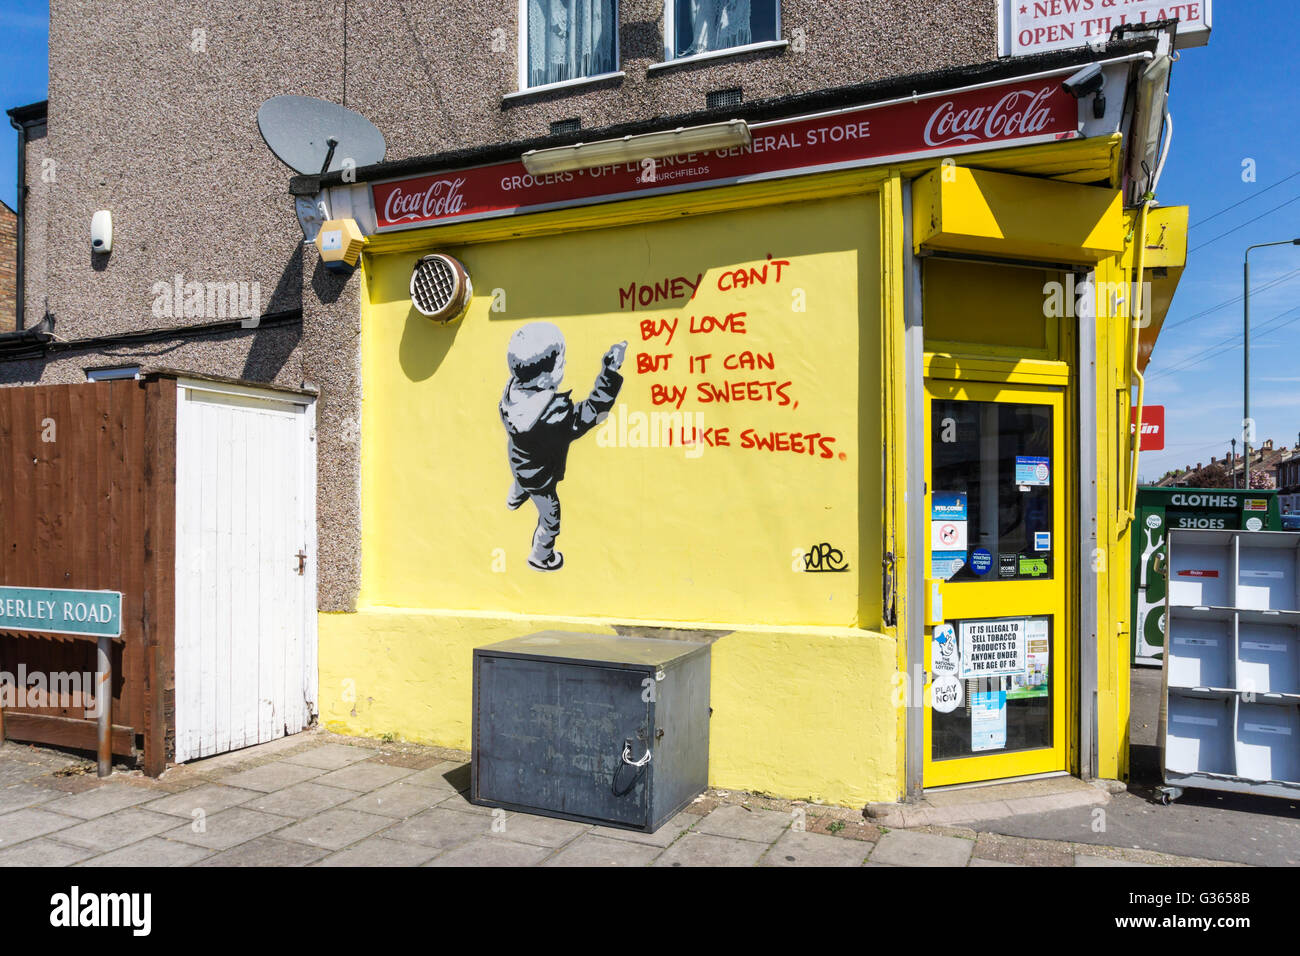 'Money can't buy love but it can buy sweets, I like sweets' graffiti by Dope on a sweet-shop in Beckenham, South London. Stock Photo